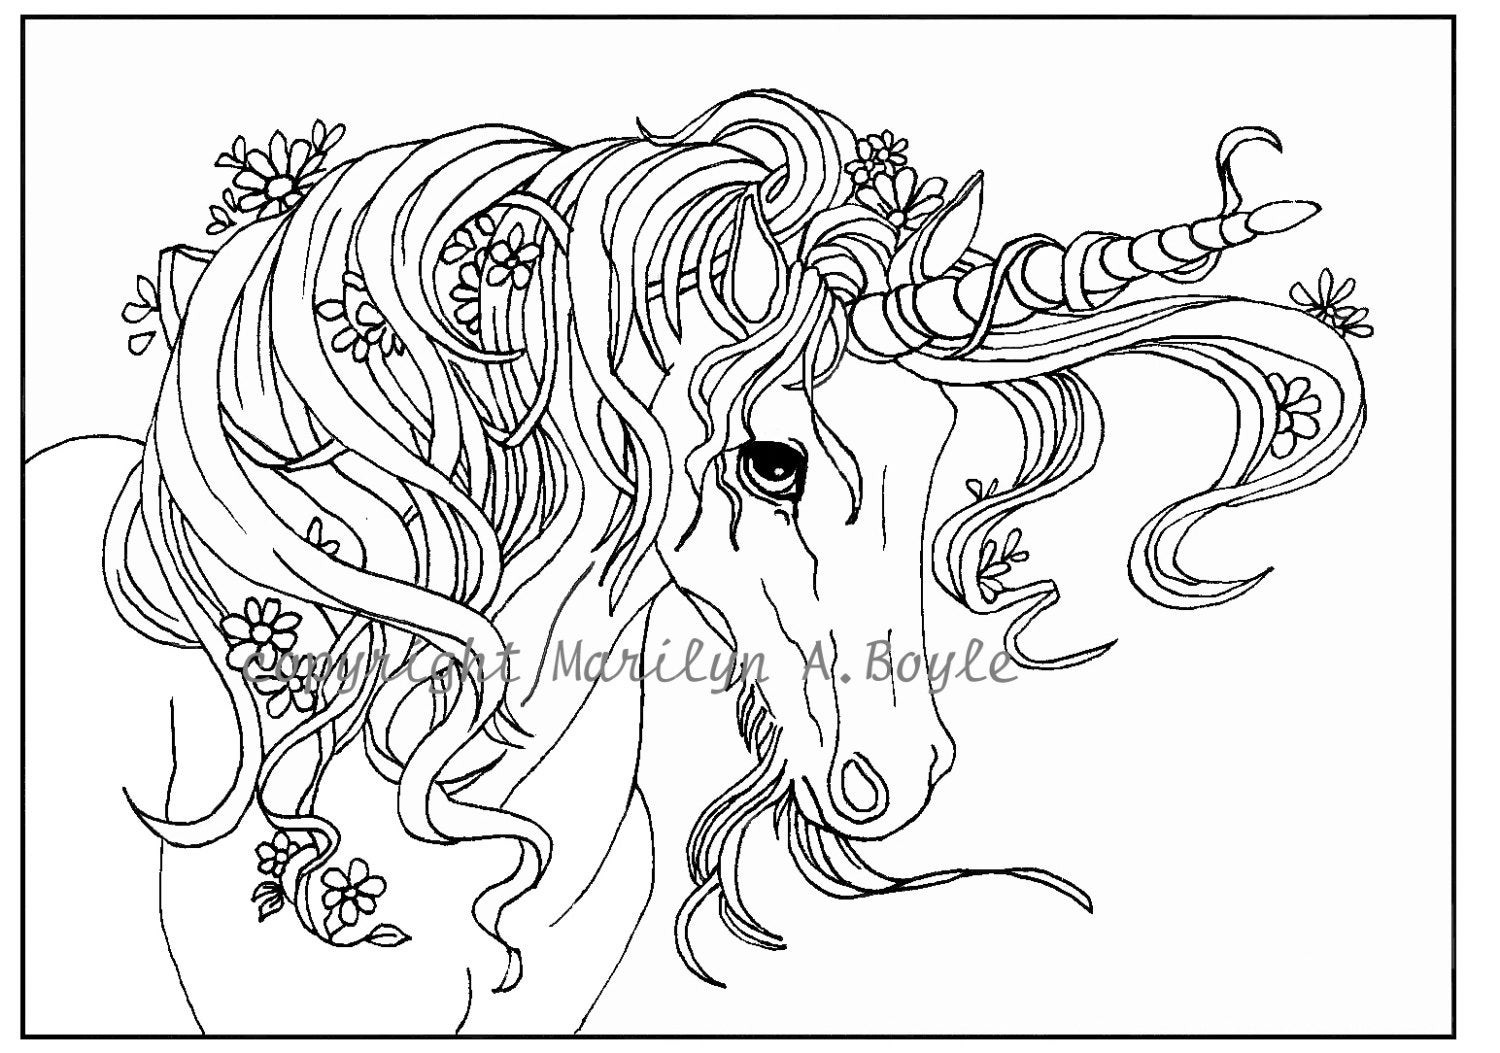 Free Unicorn Coloring Pages For Adults
 ADULT COLORING Page digital Unicorn flowers